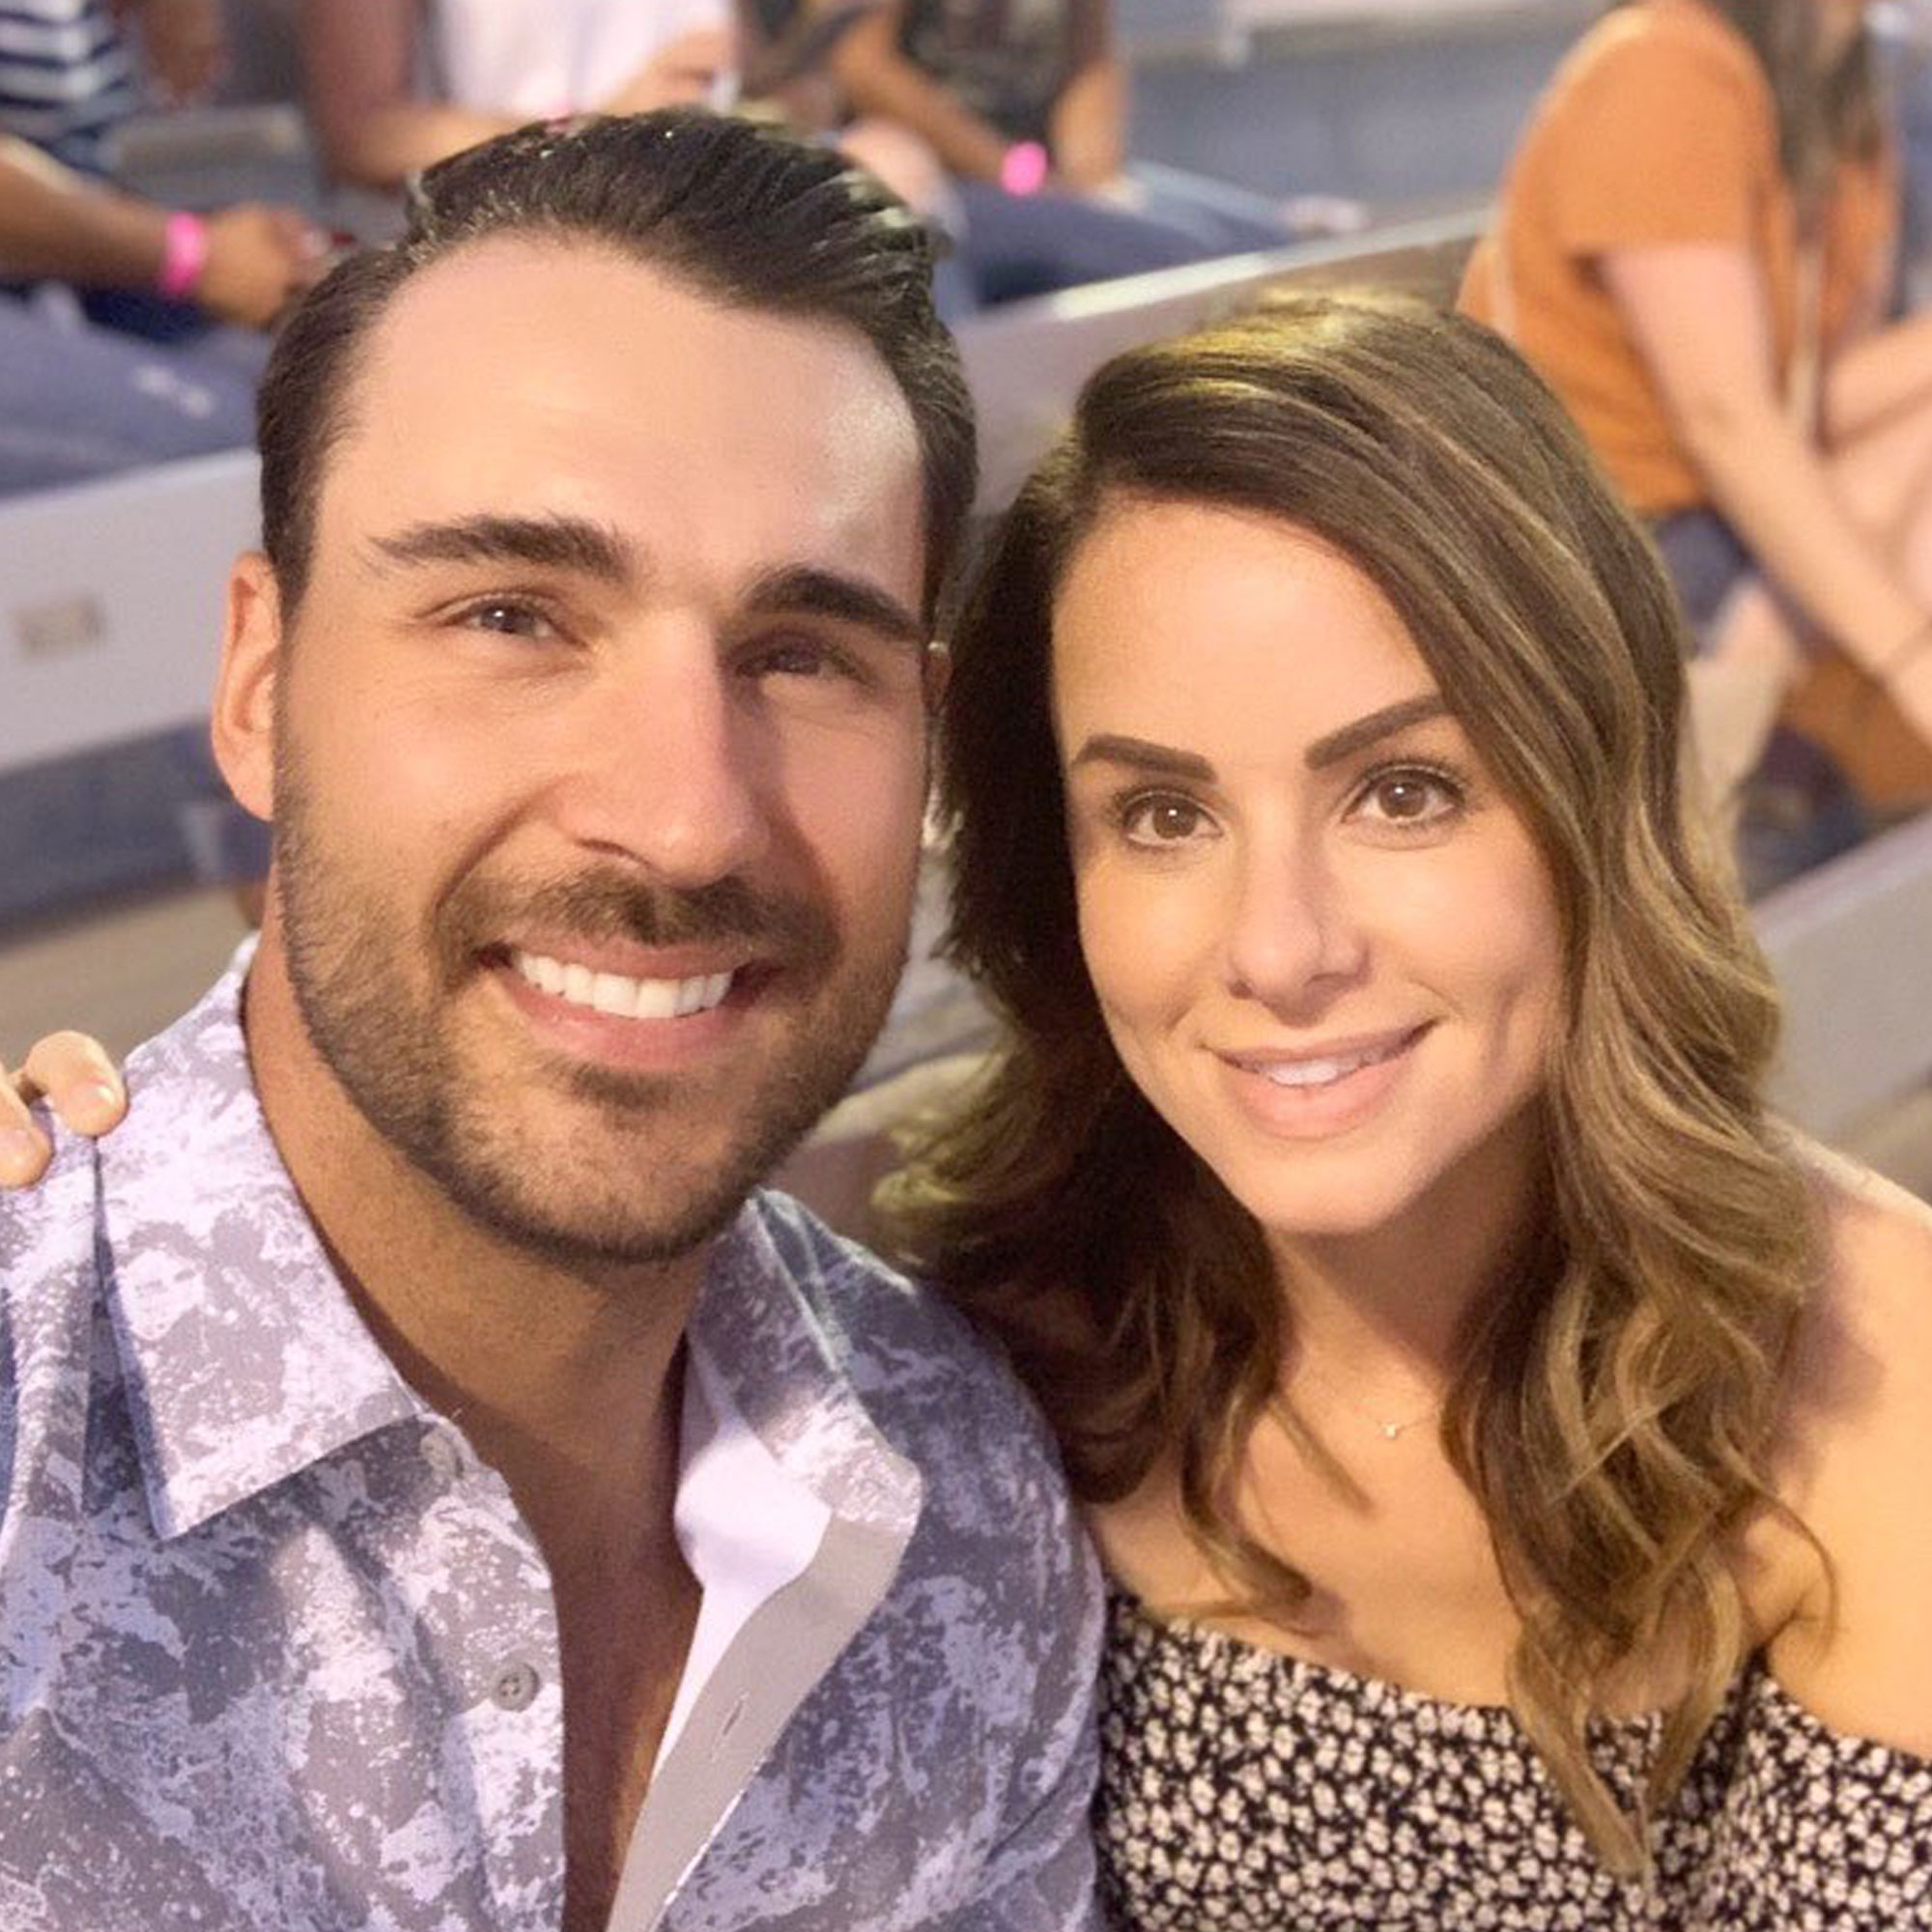 Bachelorettes Ben Zorn Is Engaged to Stacy Santilena